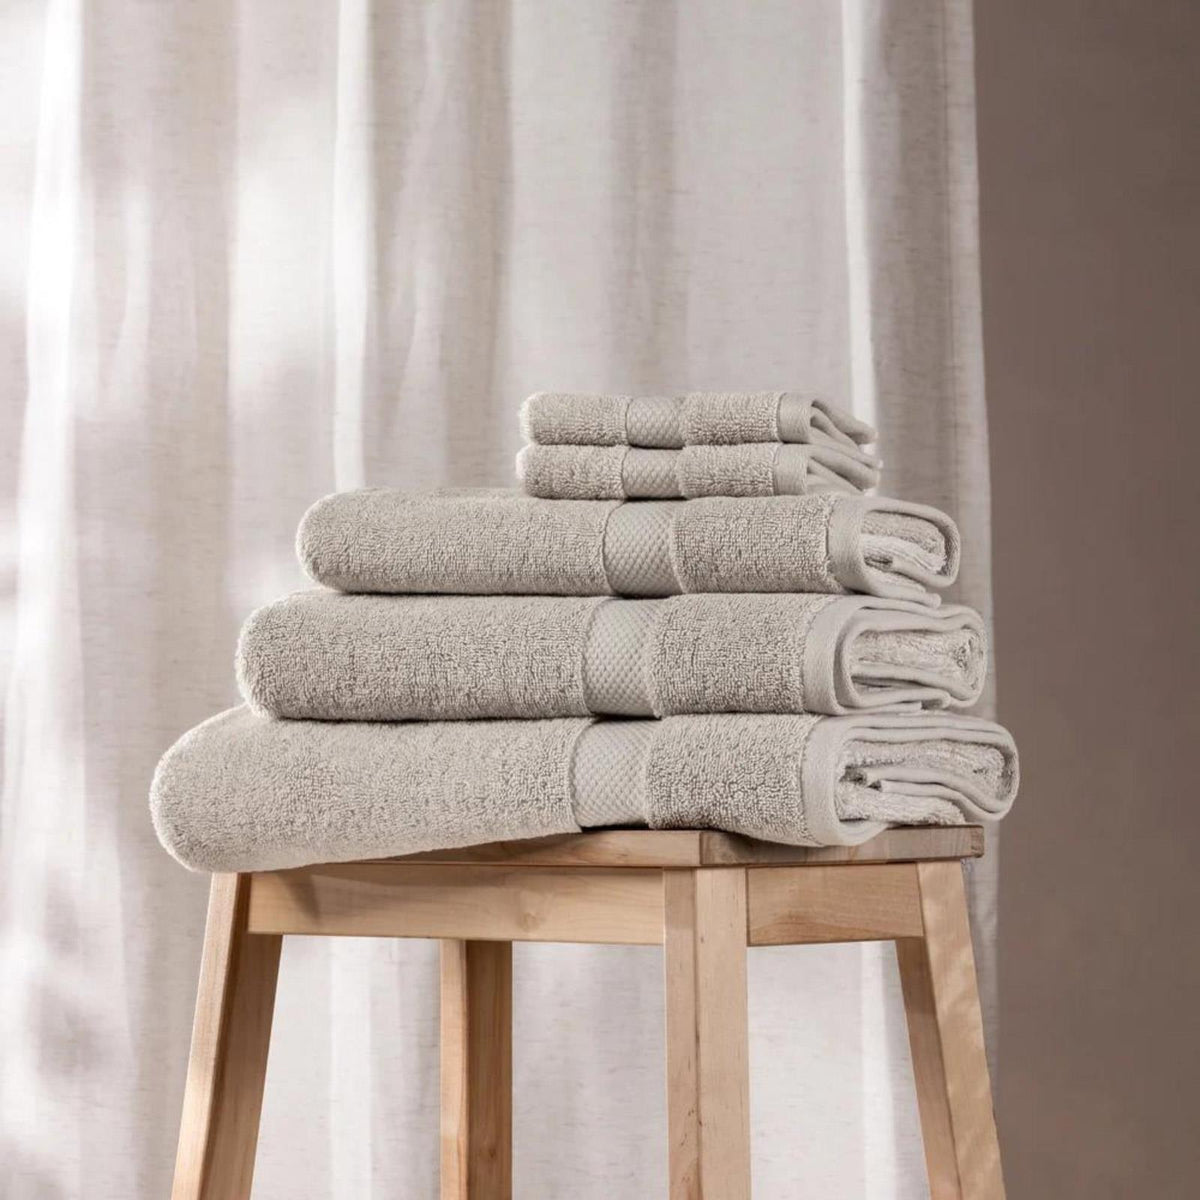 https://www.idealtextiles.shop/wp-content/uploads/1699/18/we-take-pride-in-treating-every-customer-that-comes-to-the-store-as-if-they-were-family-finding-the-loft-signature-combed-cotton-towels-dove-ideal-for-people-is-our-goal_0.jpg